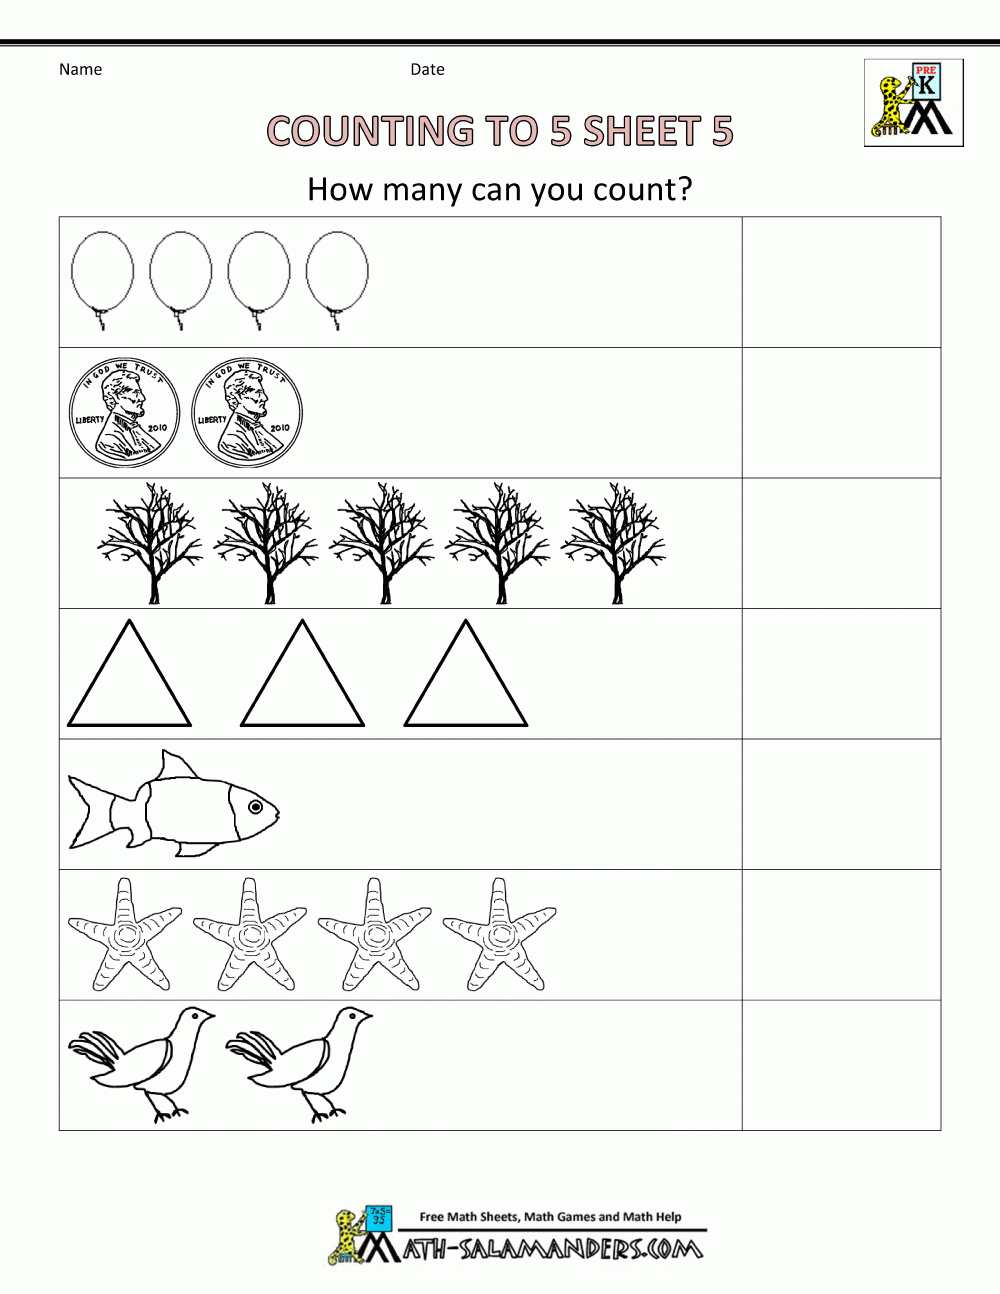 preschool-counting-worksheets-counting-to-5-free-pre-k-math